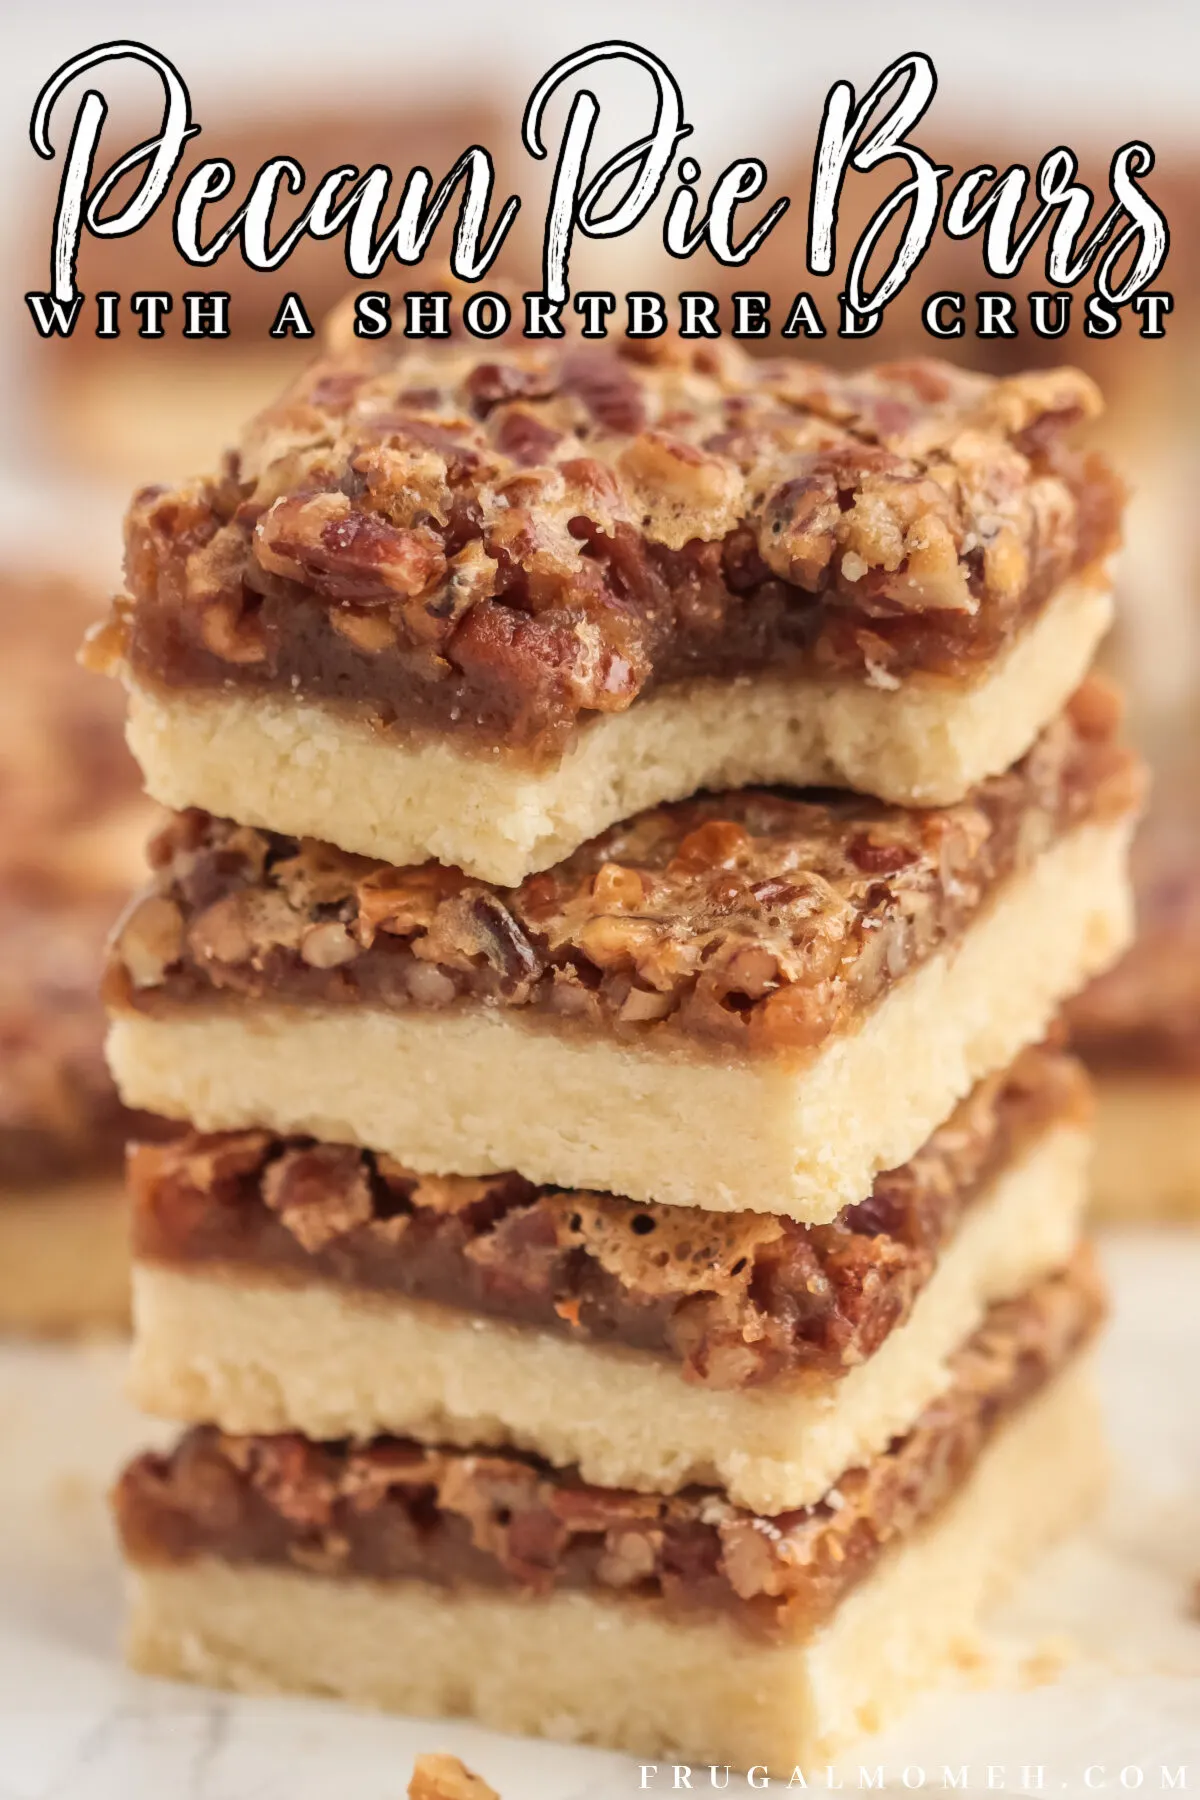 This recipe for pecan pie bars is a huge crowd pleaser. They're deliciously sweet & salty with an easy shortbread crust. Plus NO Corn Syrup!